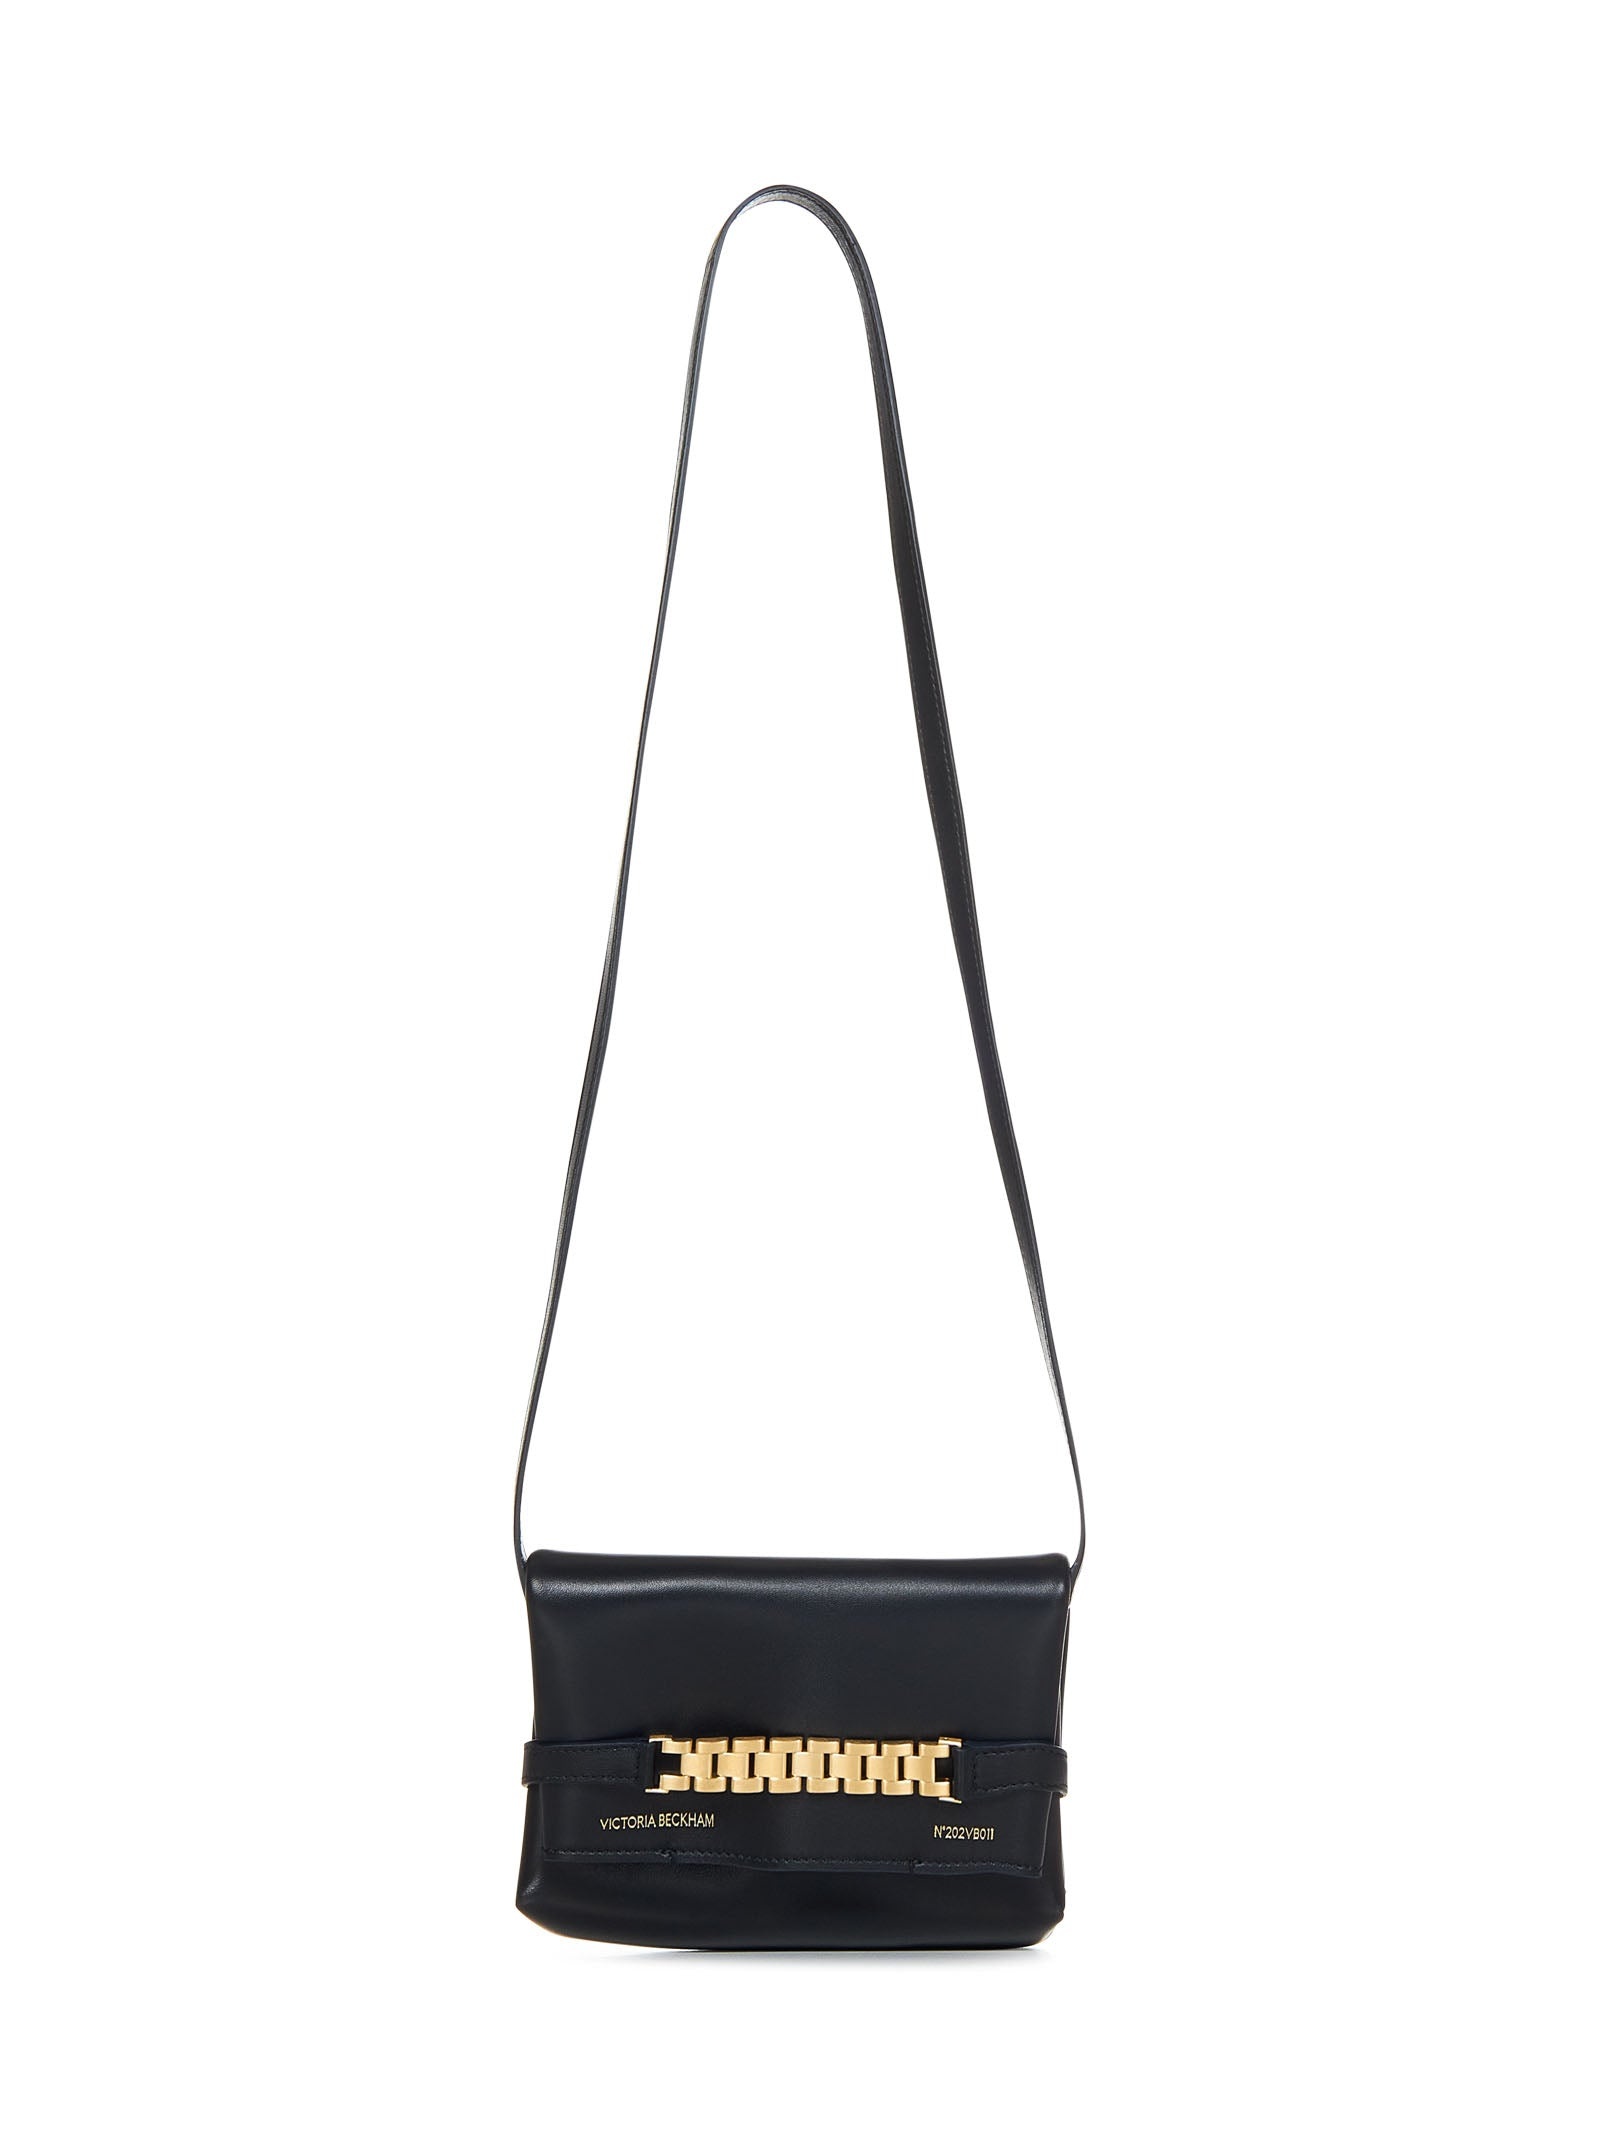 CLUTCH MINI POUCH WITH LONG STRAP VICTORIA BECKHAM - 1